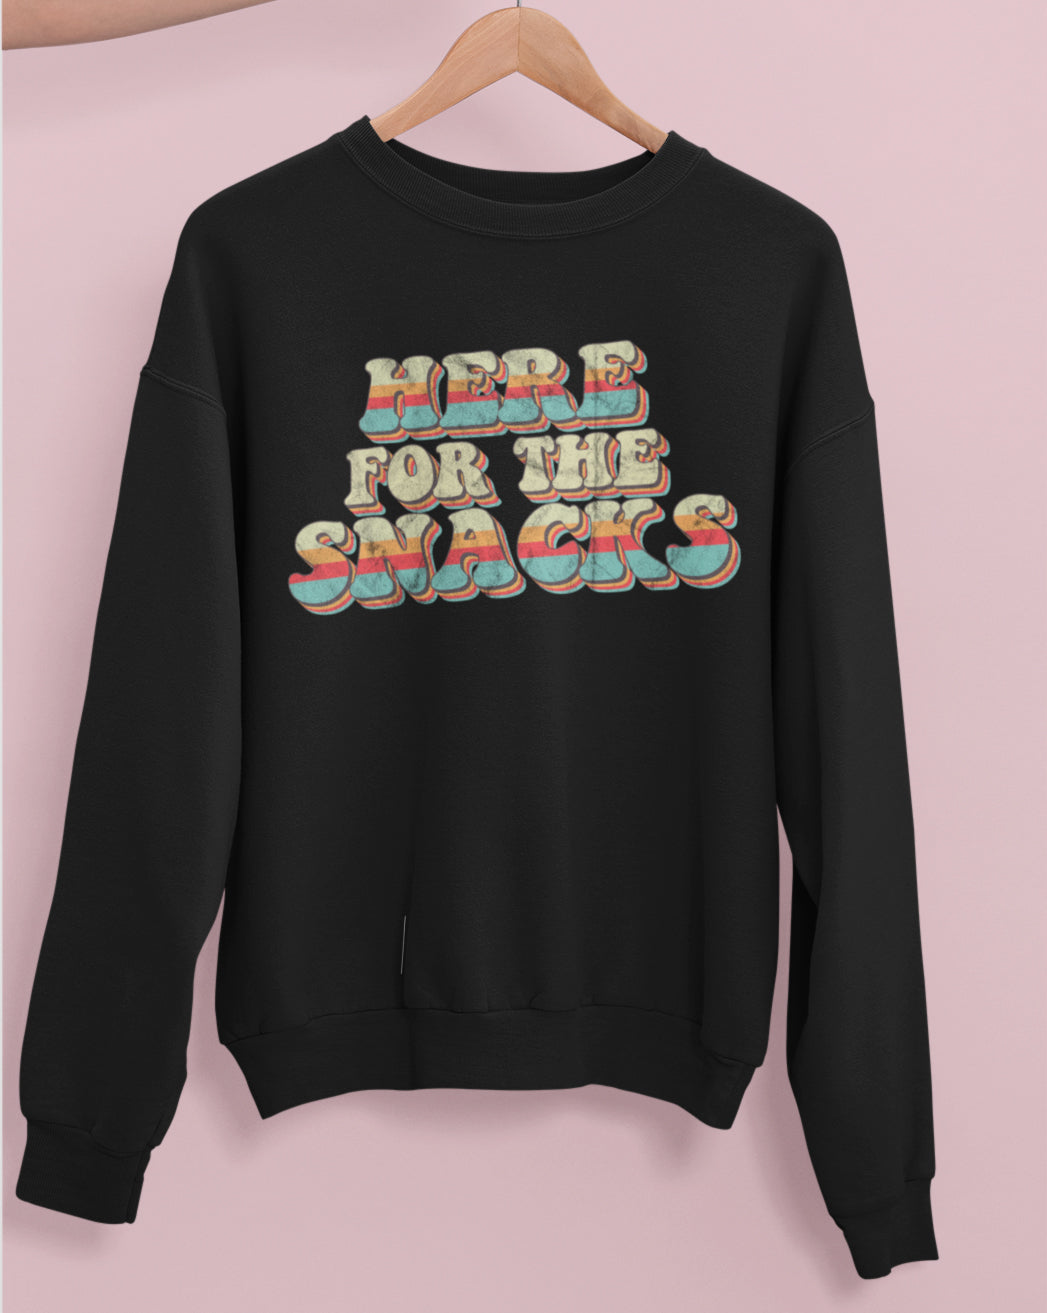 Black sweatshirt with colorful retro graphic that says here for the snacks - HighCiti